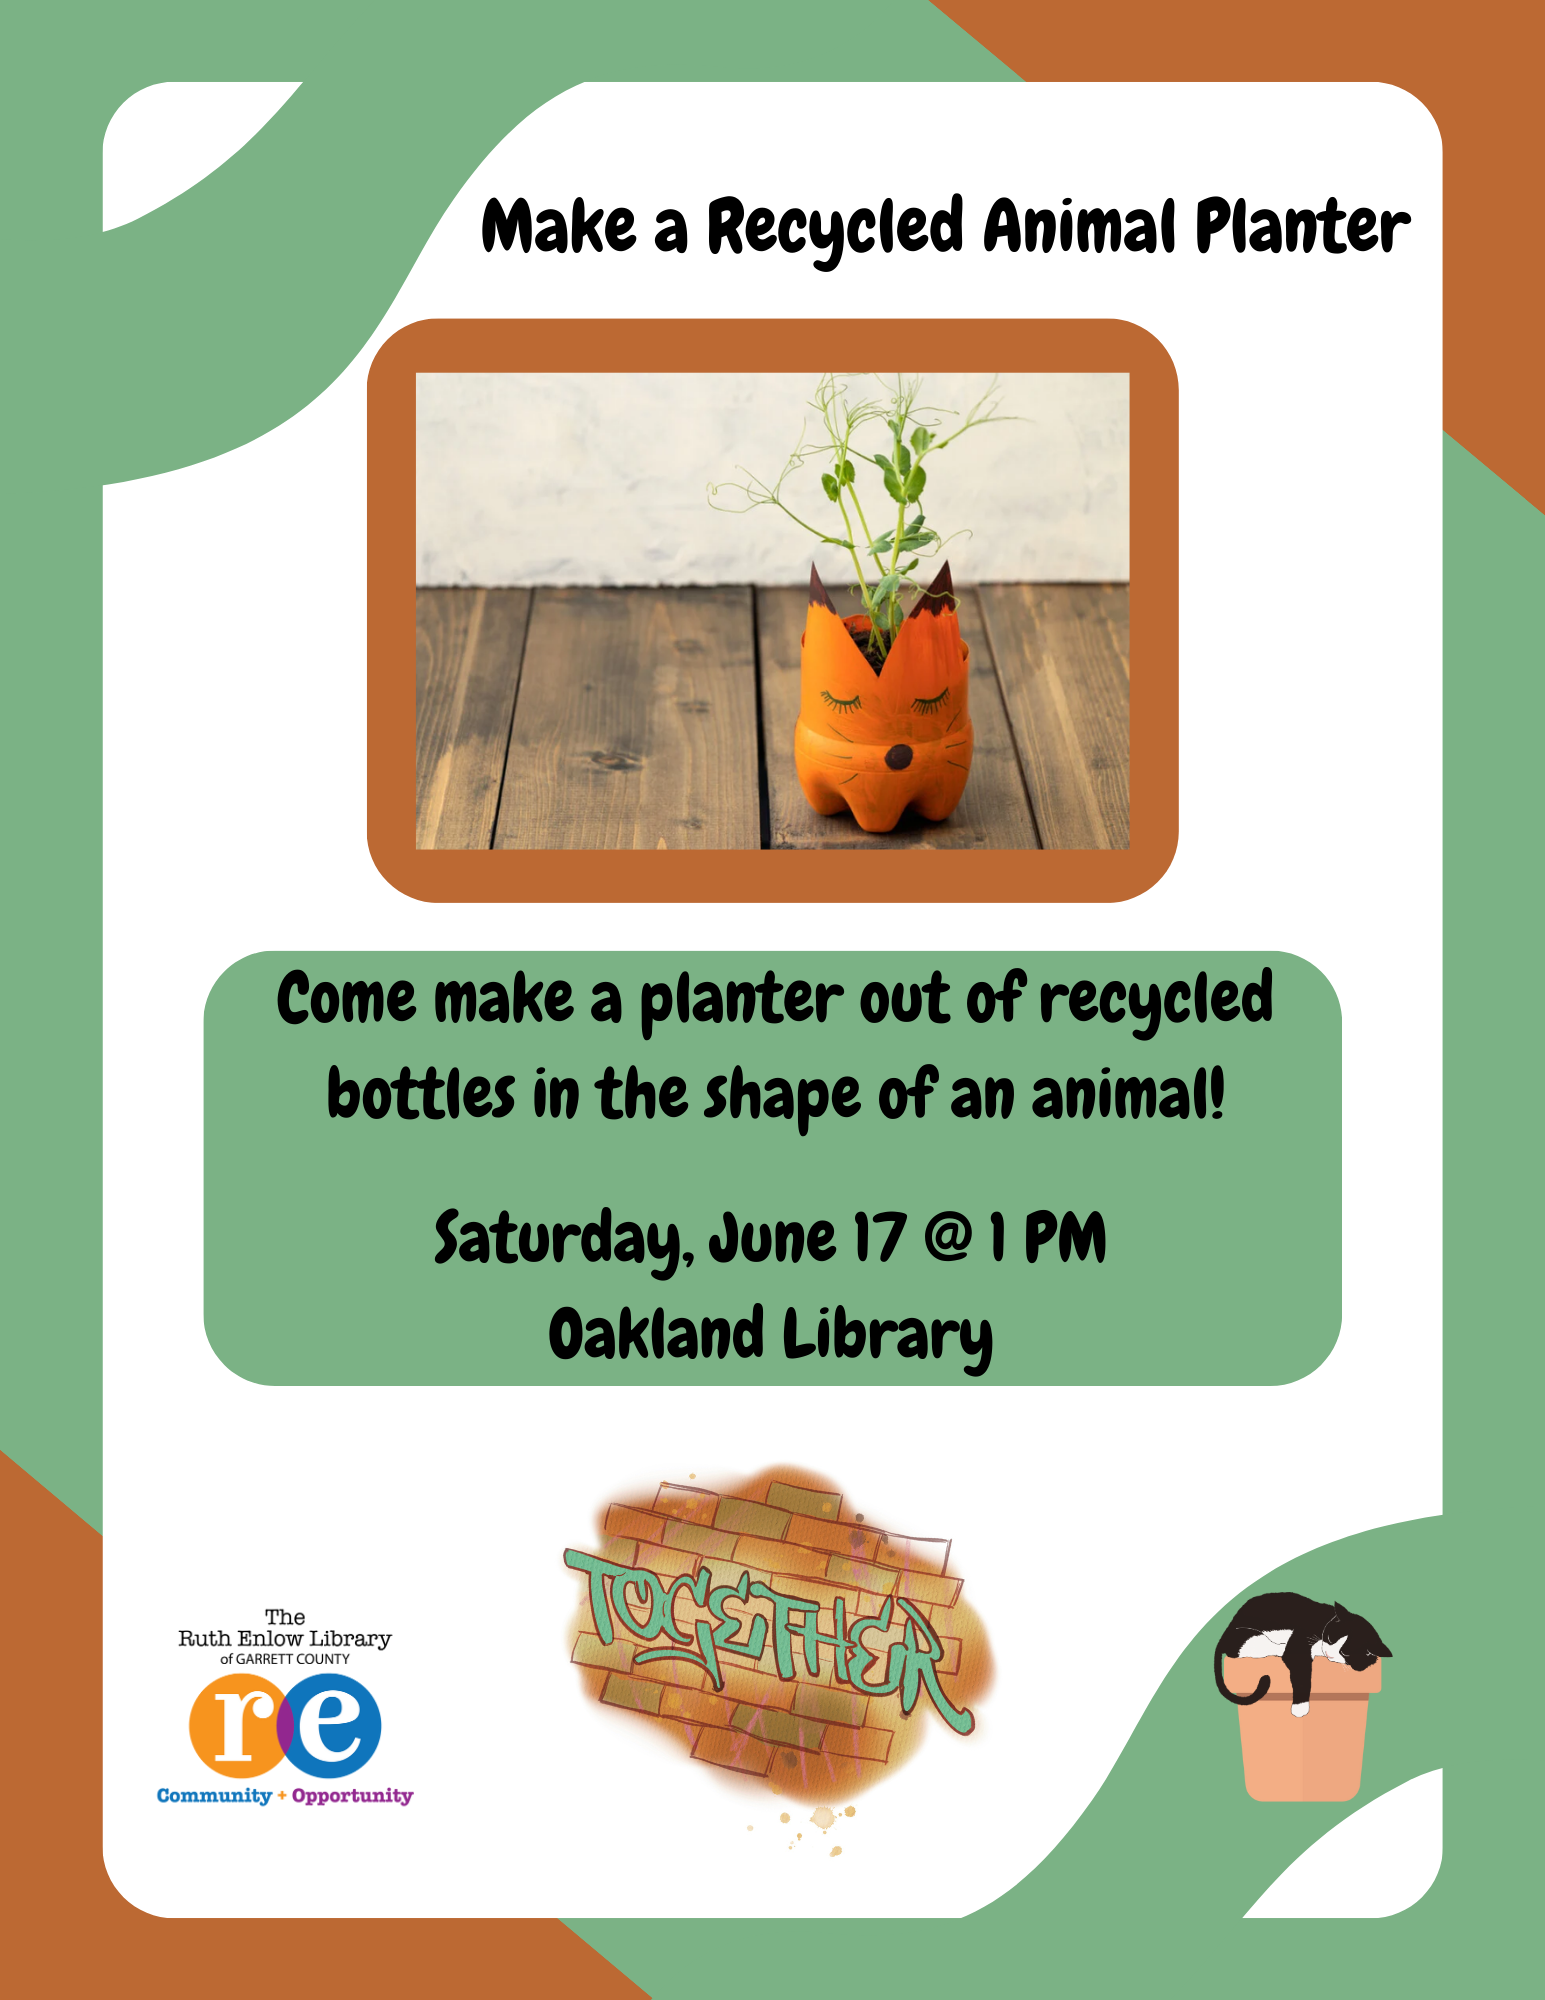 Make a Recycled Animal Planter